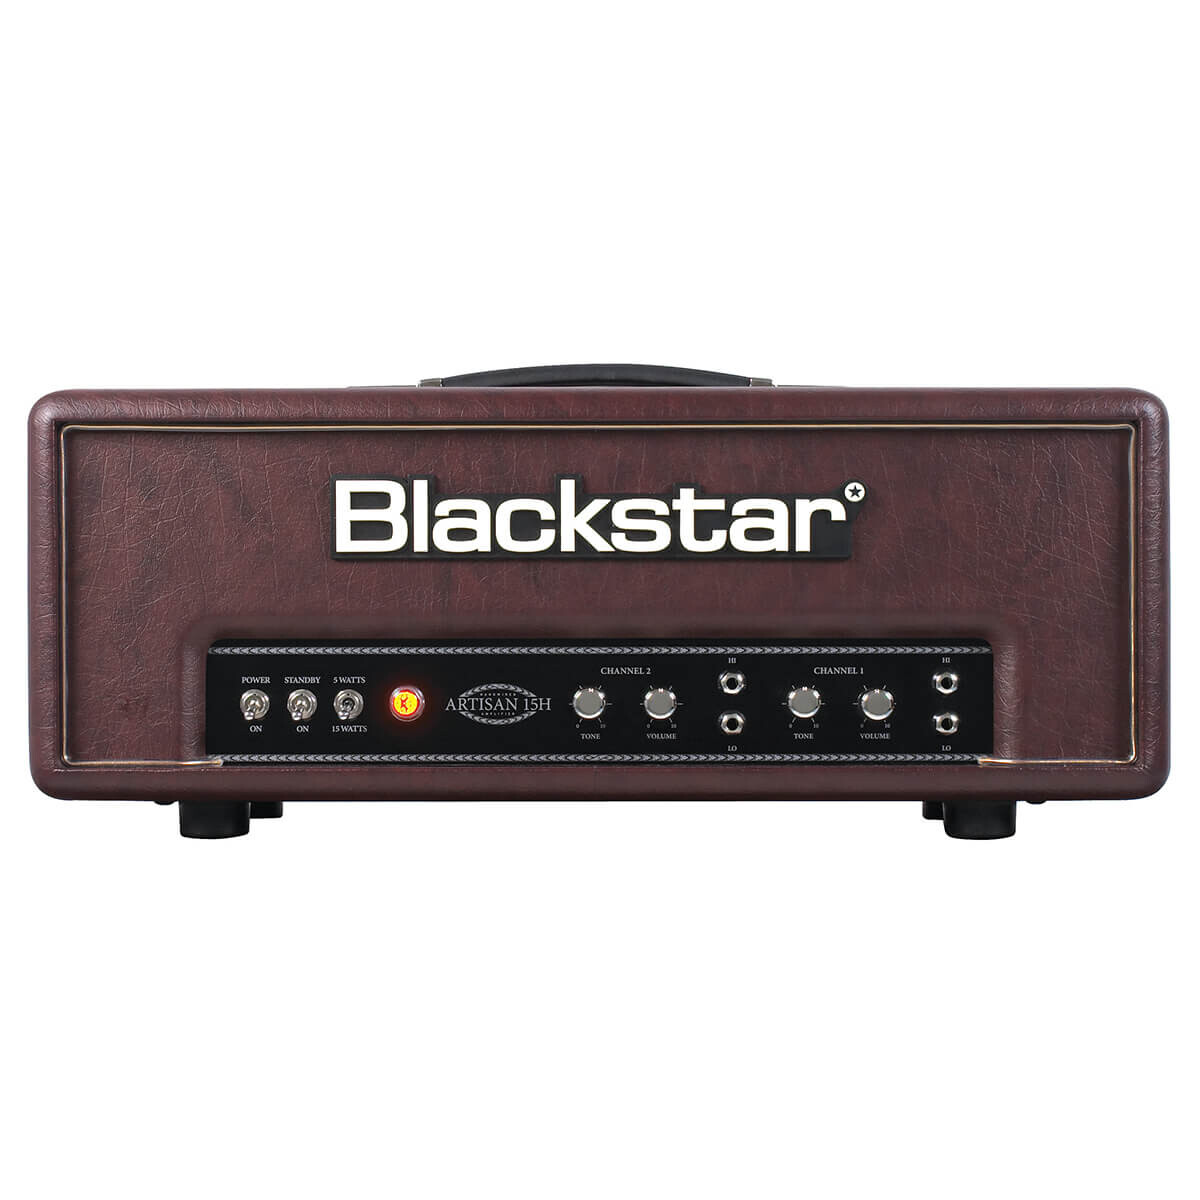 Blackstar Amplification: New Products